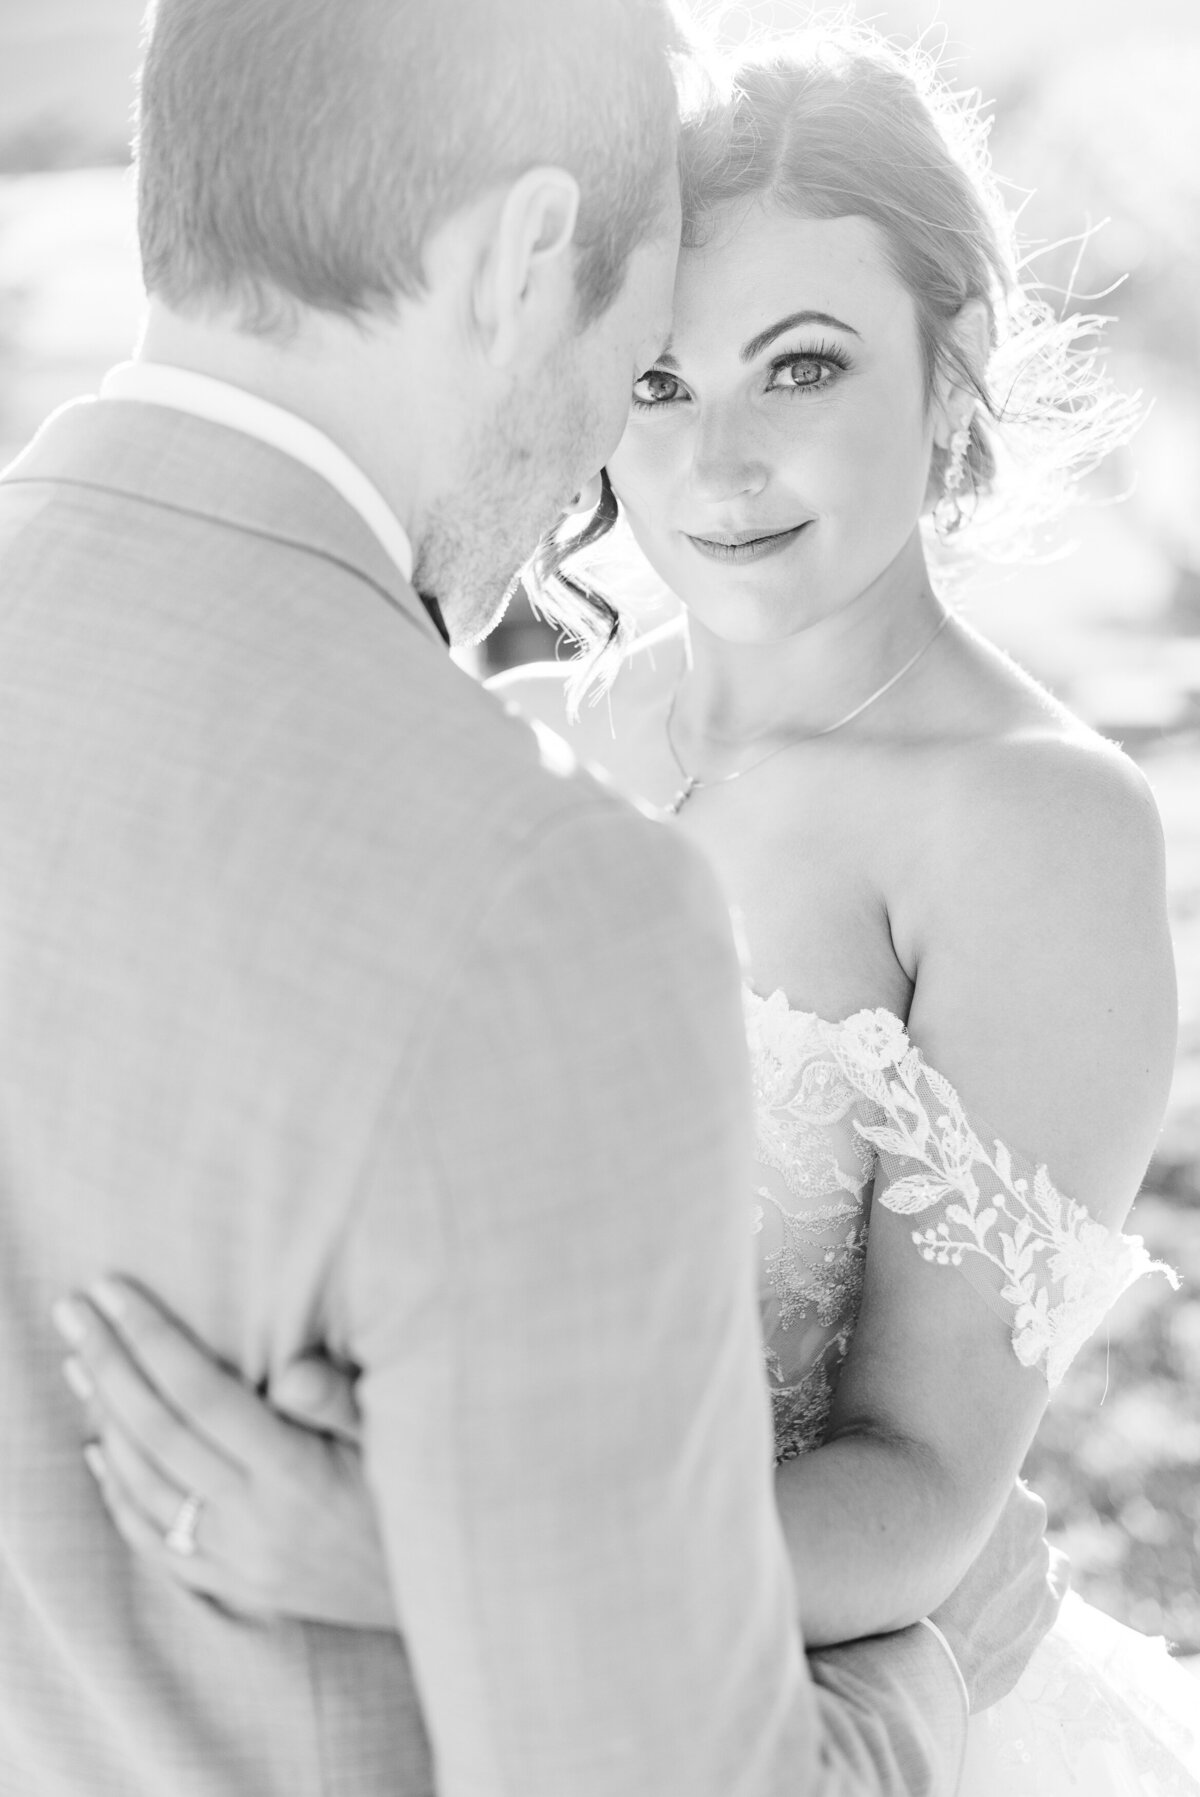 Black and white photograph of a bride looking over her groom's shoulder at the camera.